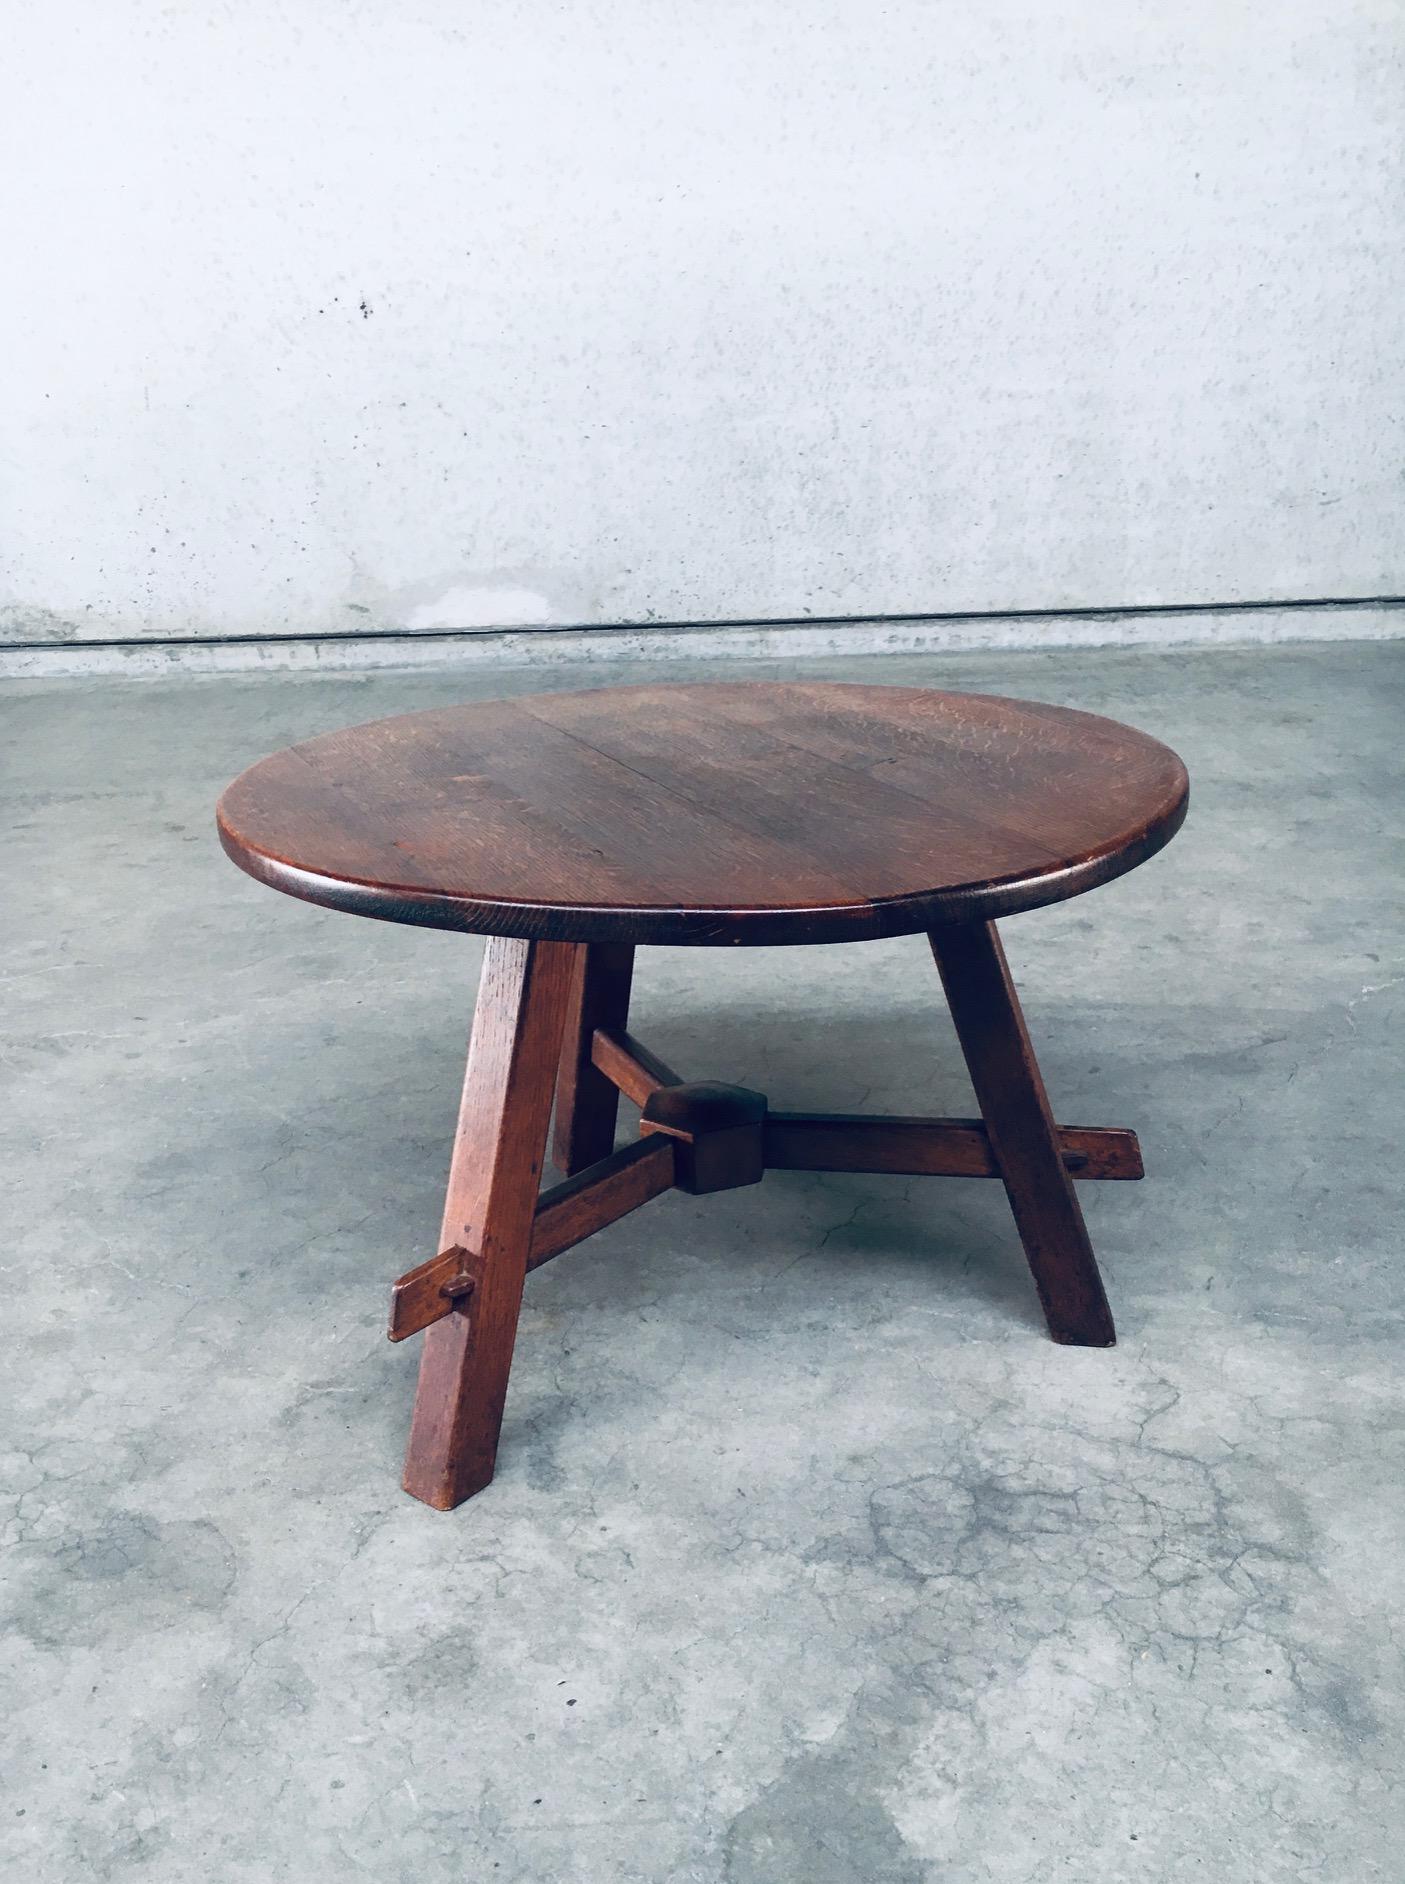 Vintage Rustic Handcrafted Design Oak Side or small Coffee Table. Made in France, 1940's. Solid oak constructed, dark stained round side table or small coffee table. Tripod legs with central connection. In very good, all original condition with